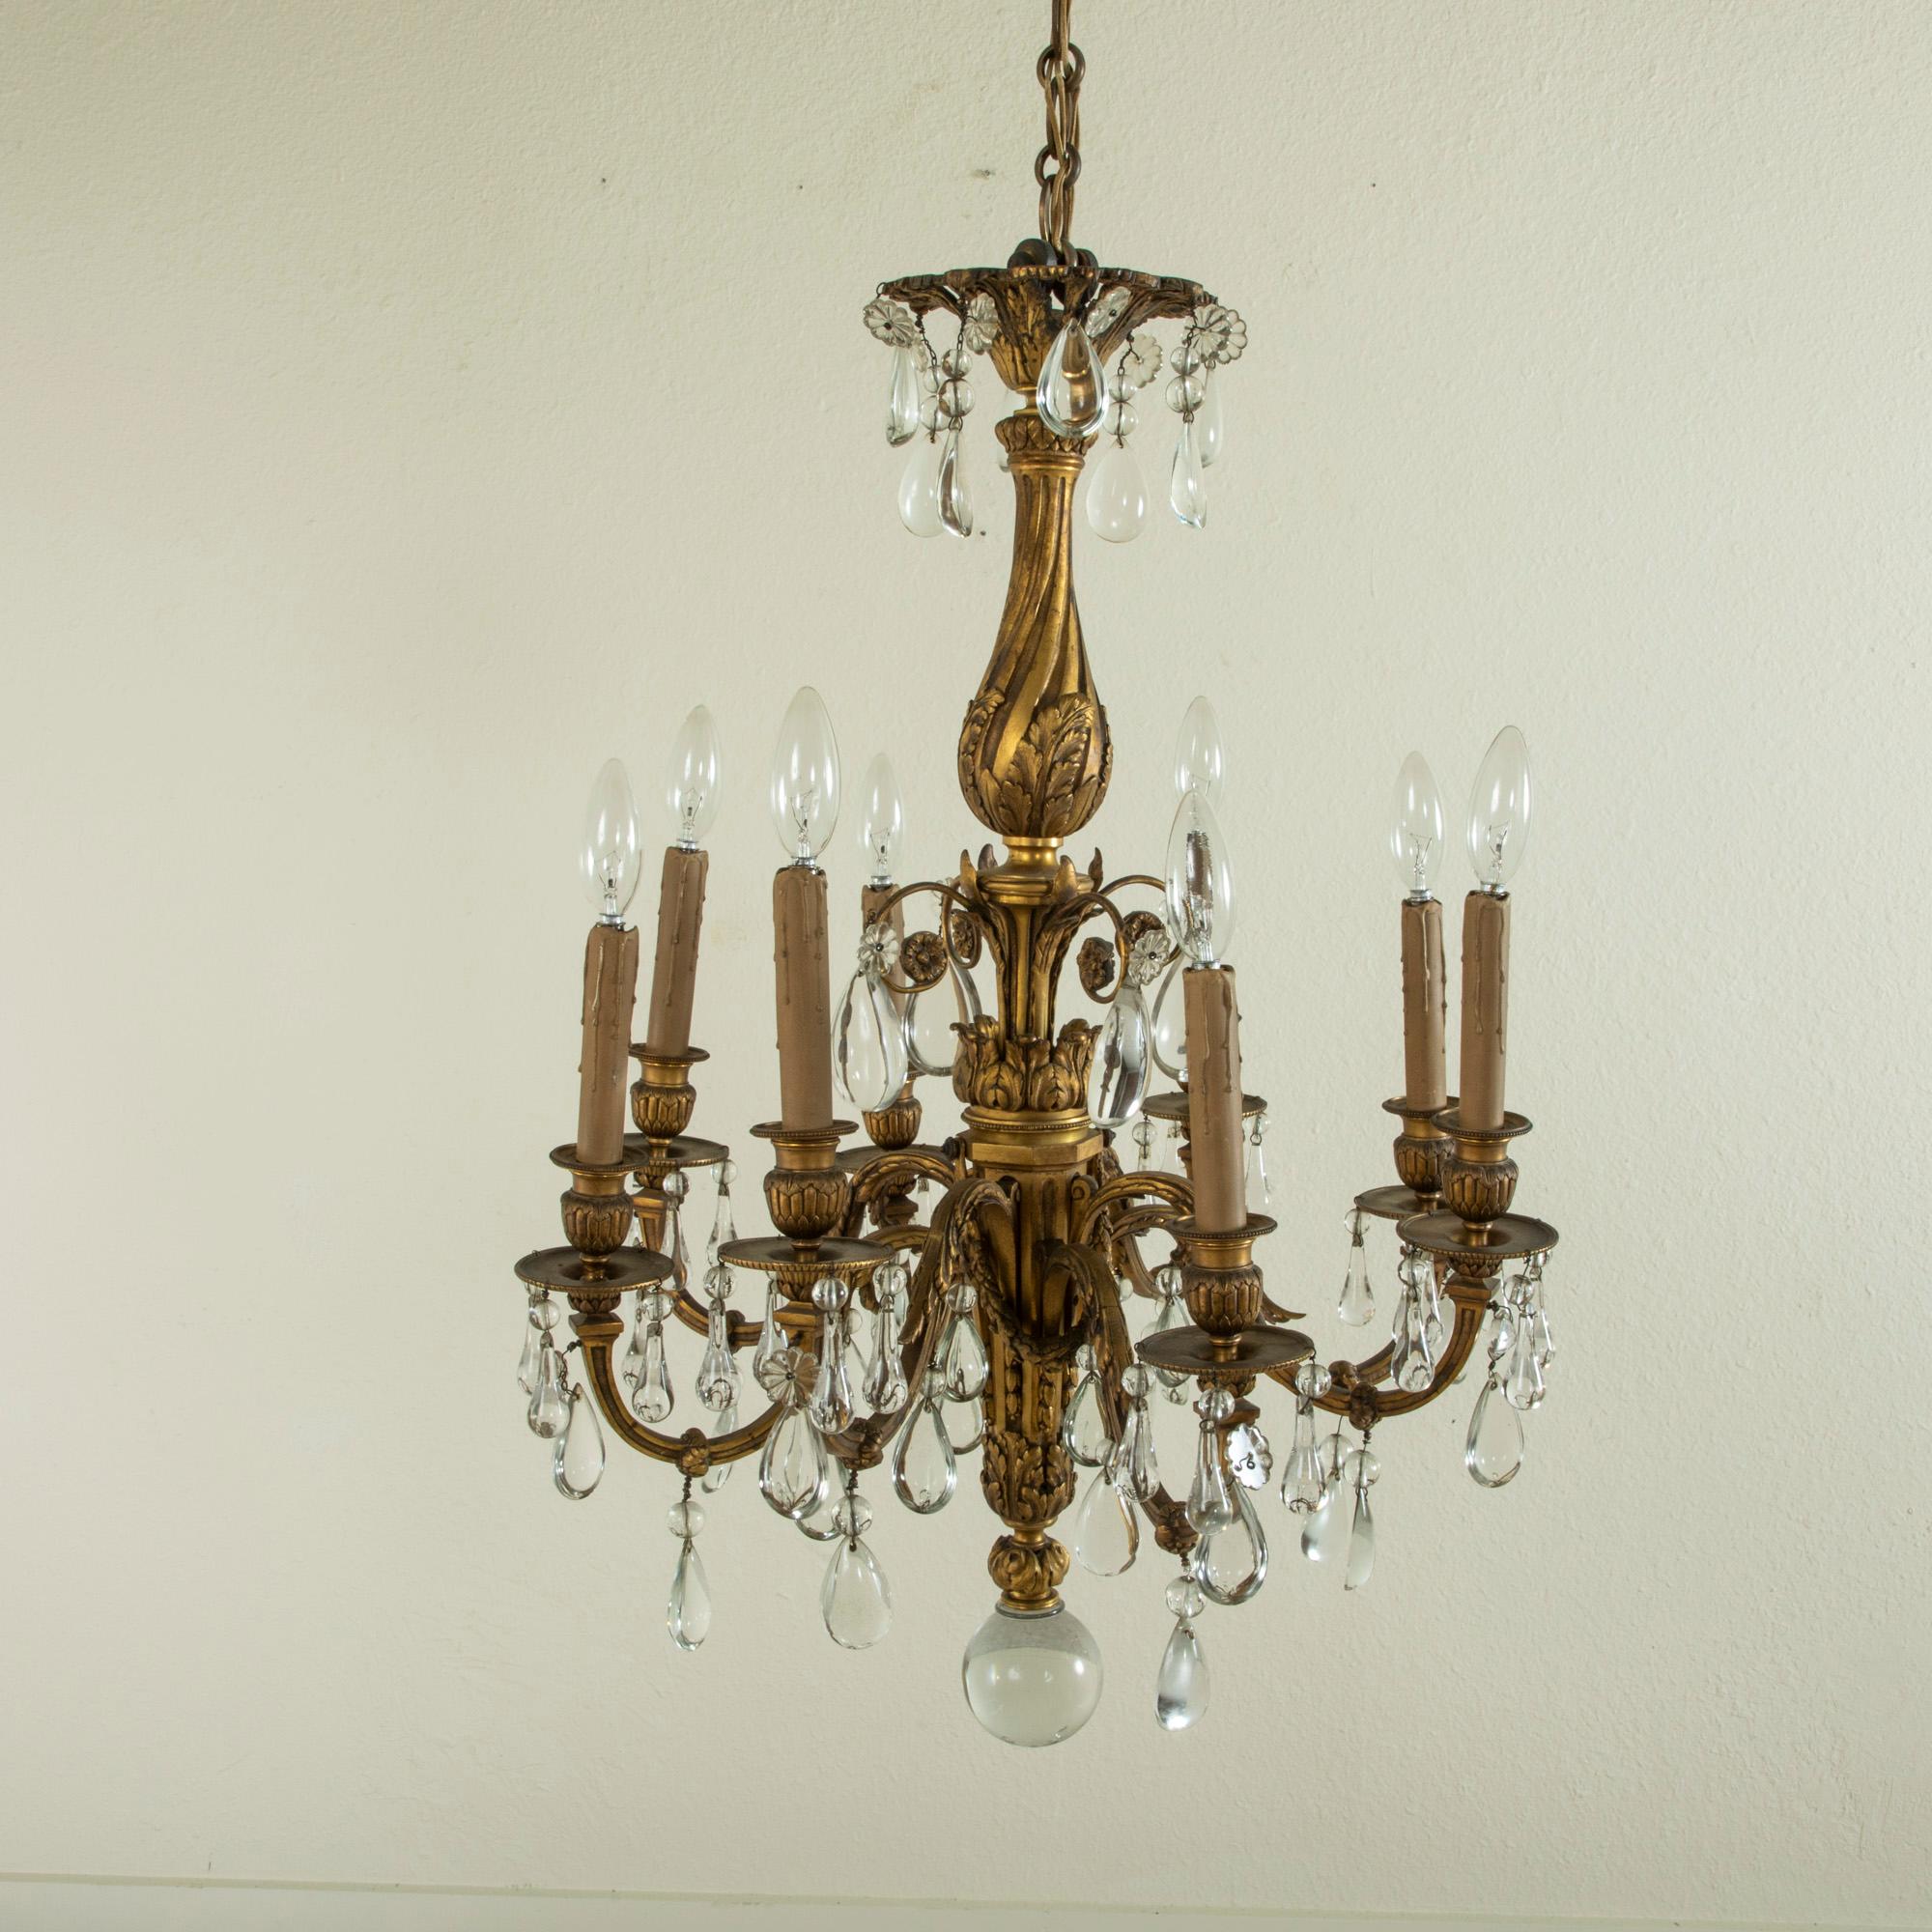 This mid-nineteenth century French Napoleon III period solid bronze chandelier features large crystal teardrops that hang from its eight arms. The central spiral fluted bronze pillar is detailed with acanthus leaves and garlands and a large crystal